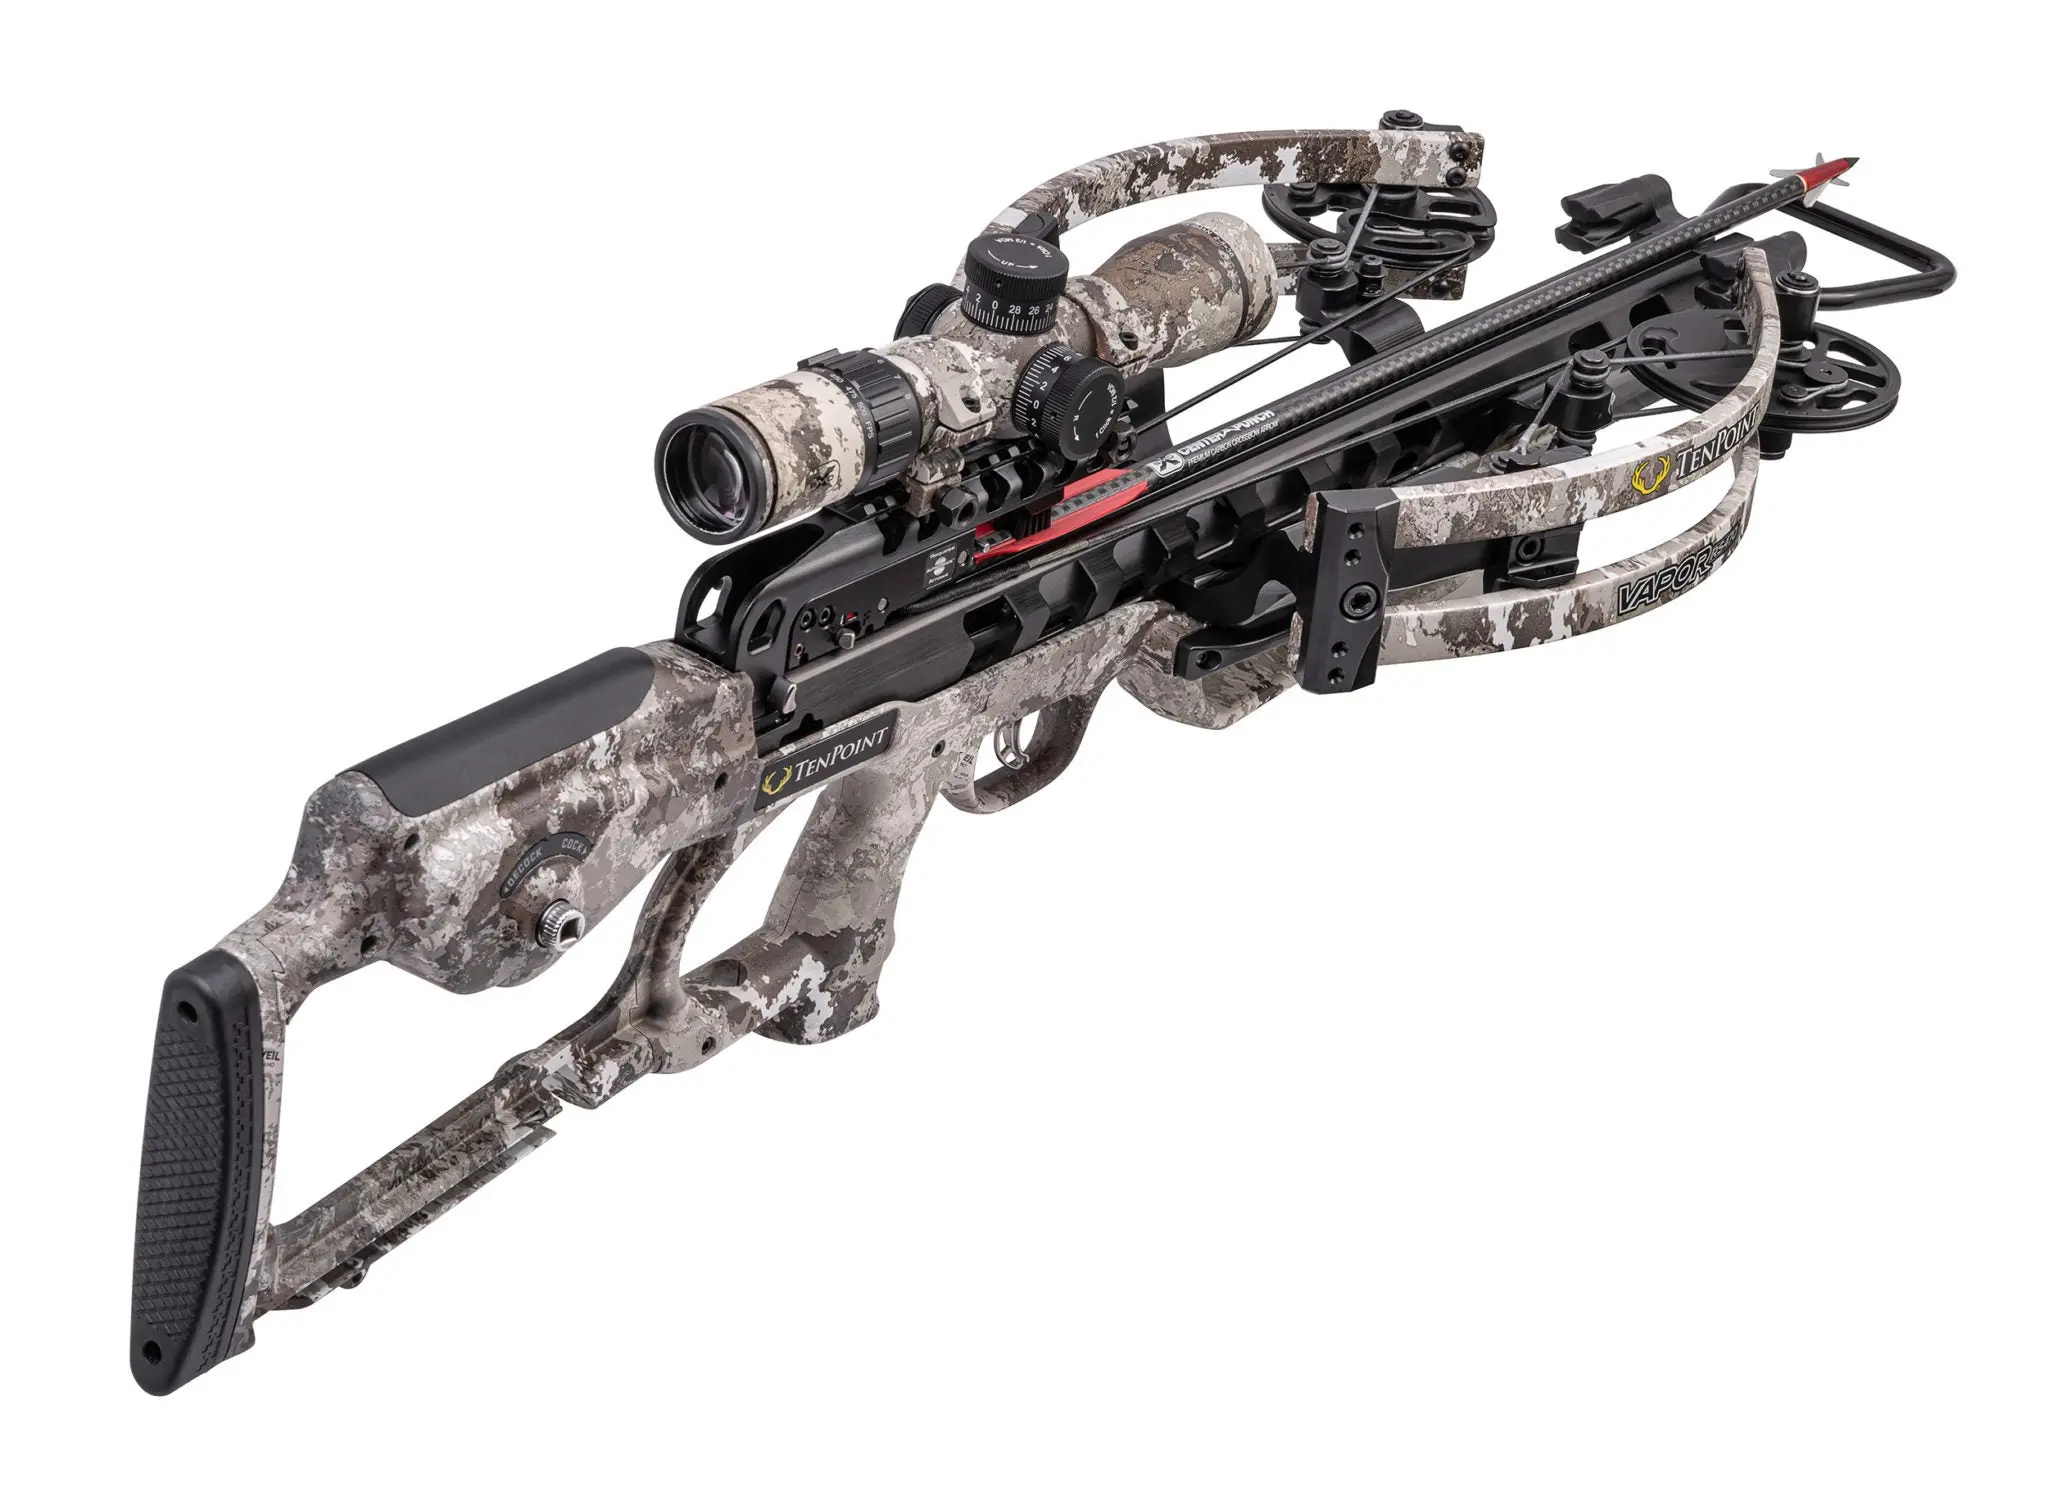 The TenPoint Vapor RS470 is the fastest crossbow from TenPoint.